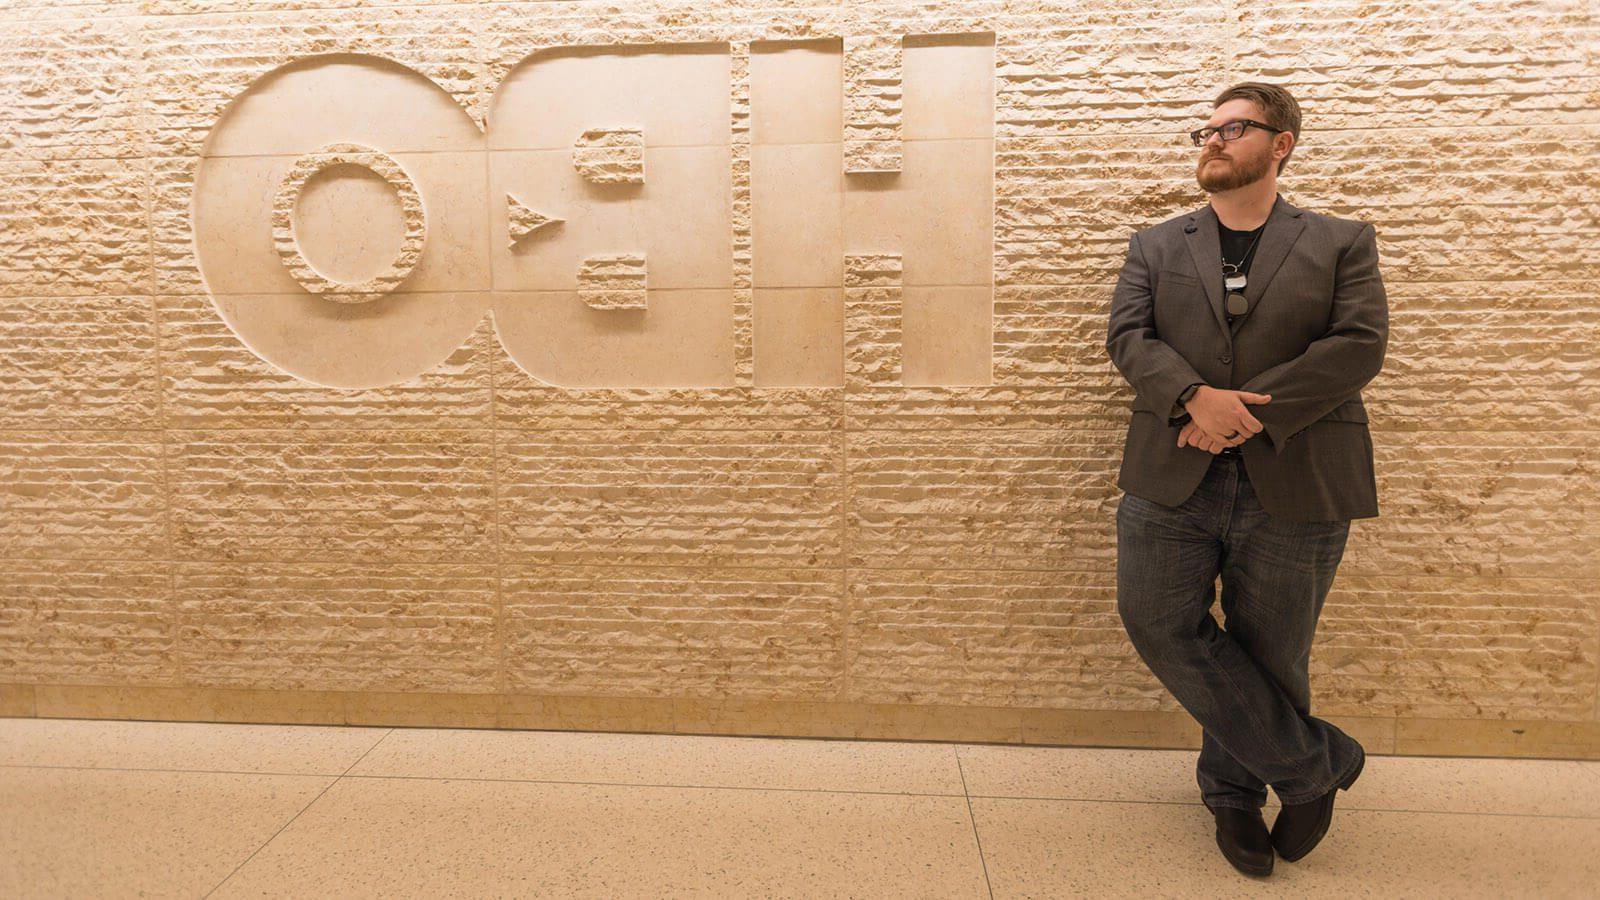 Wearing a suit and glasses, Stephen打转 leans against a beige, textured stone wall with the HBO logo carved into it.